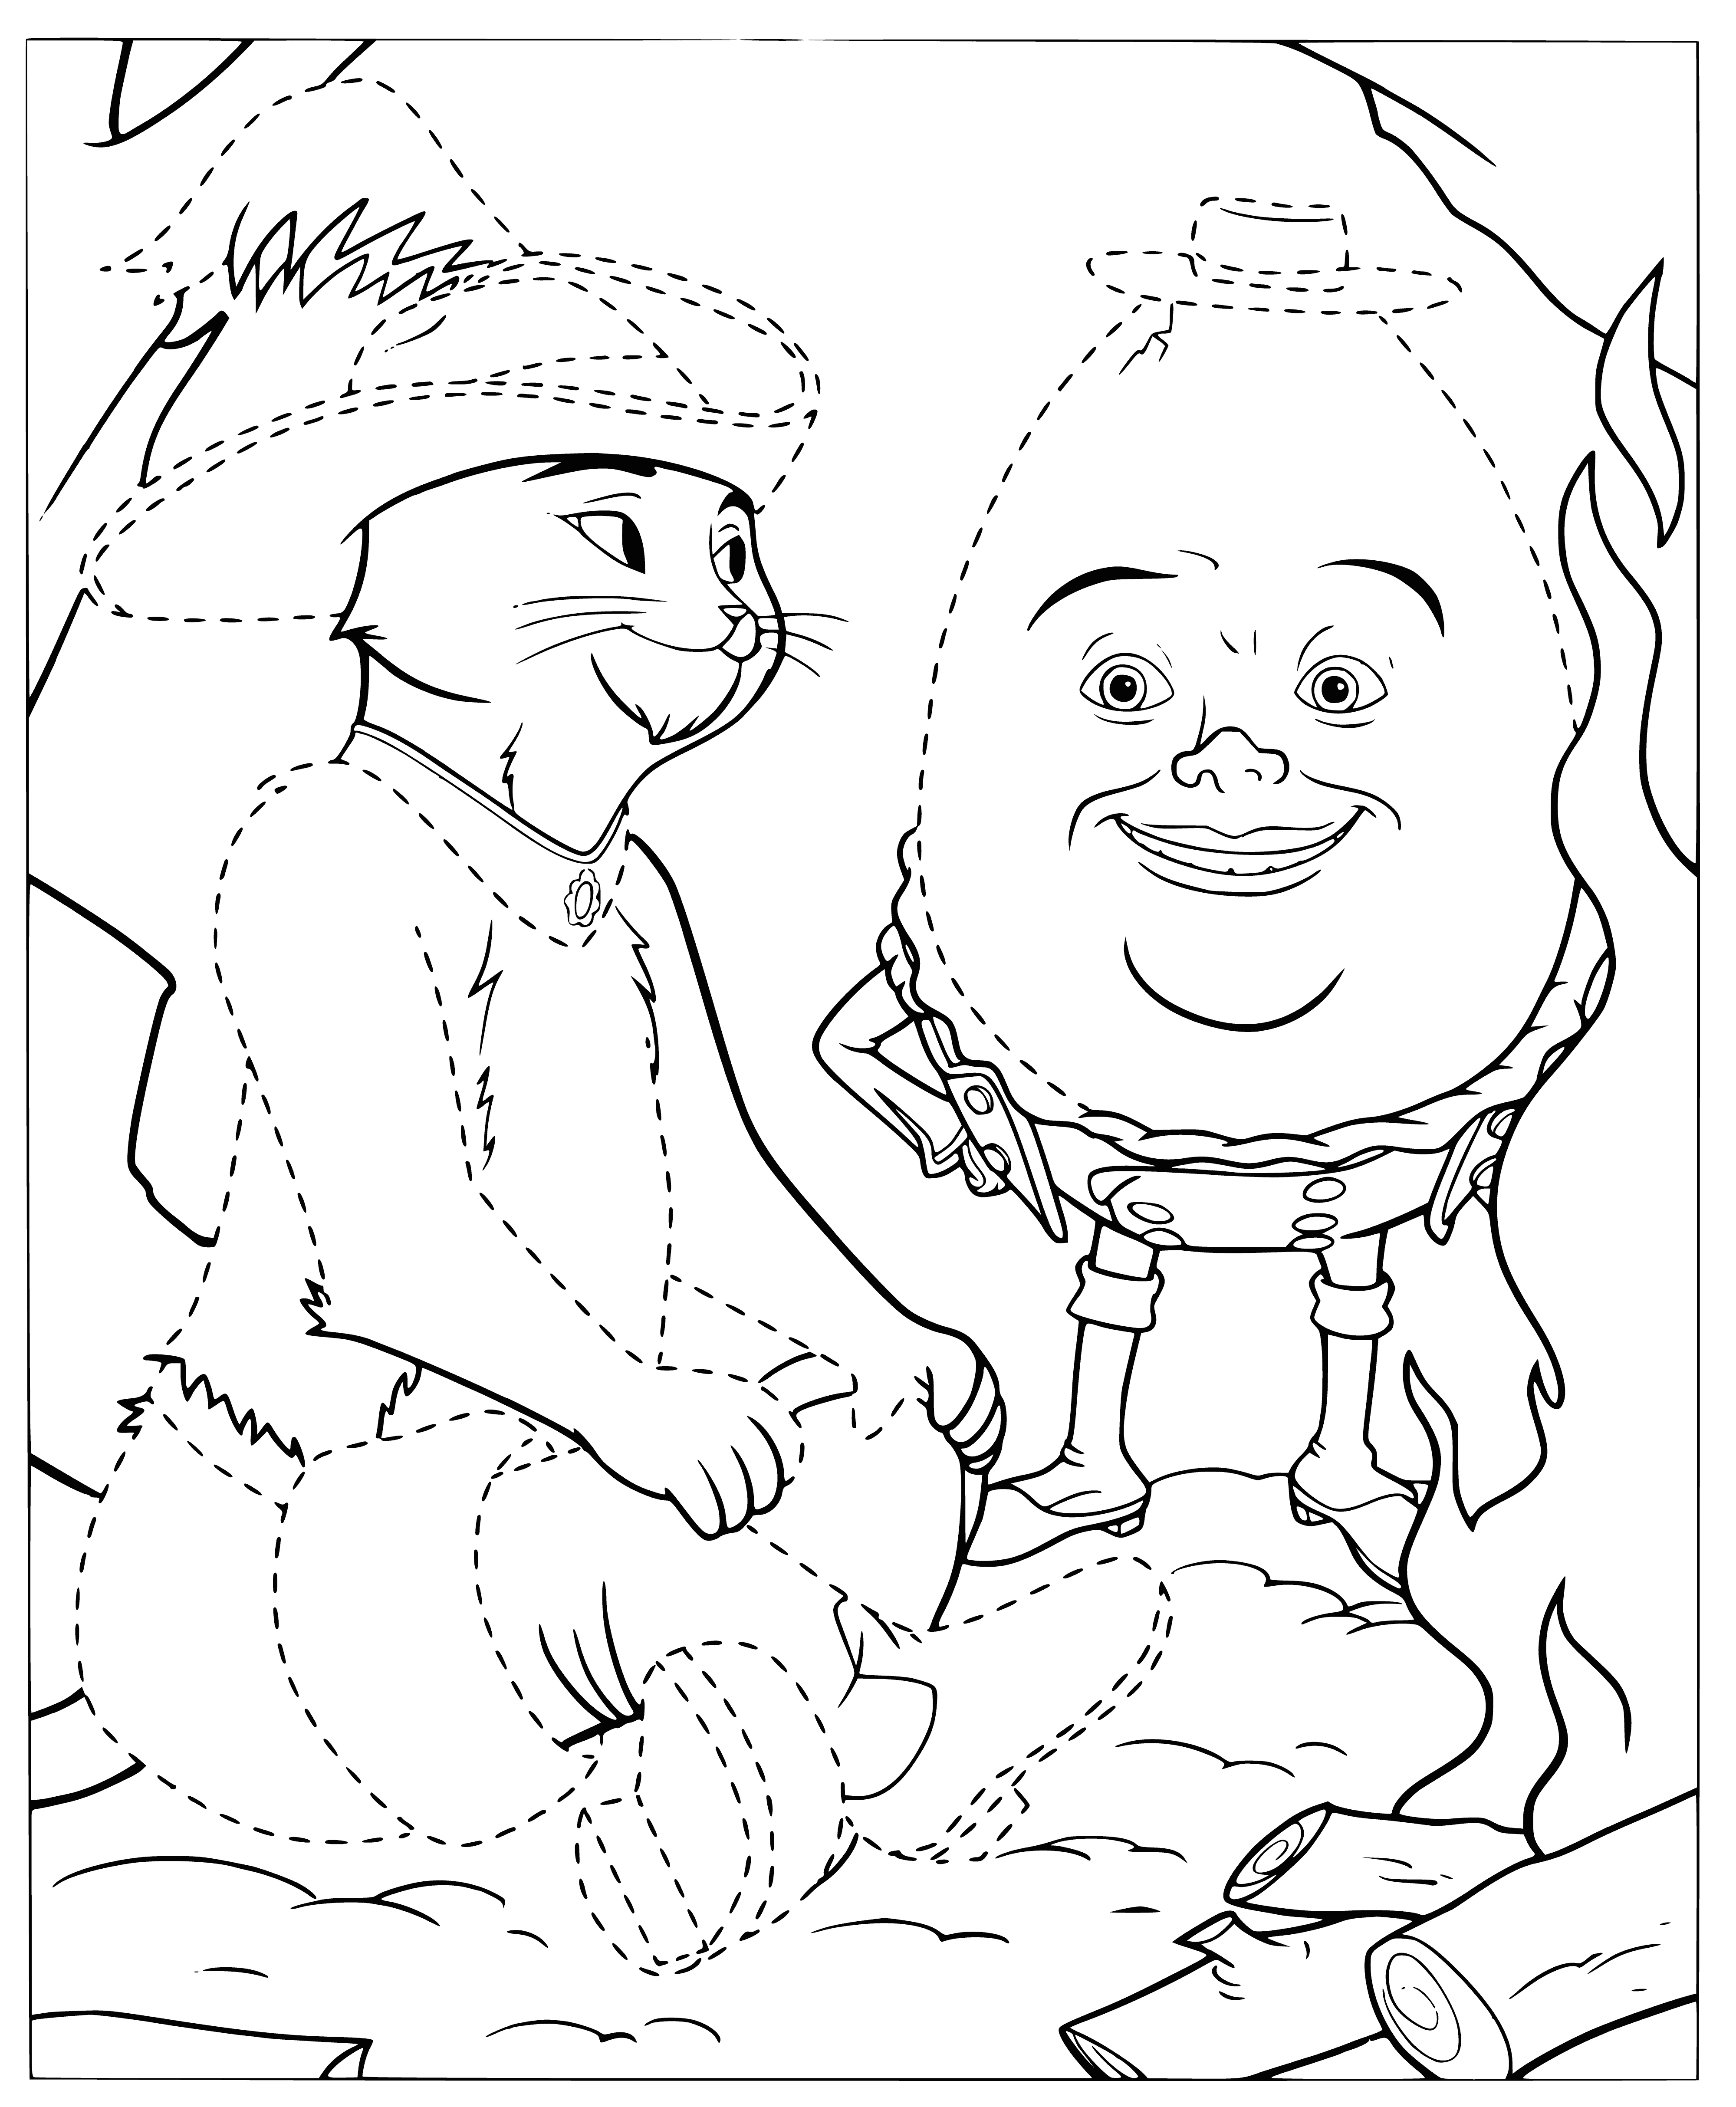 Old friends coloring page